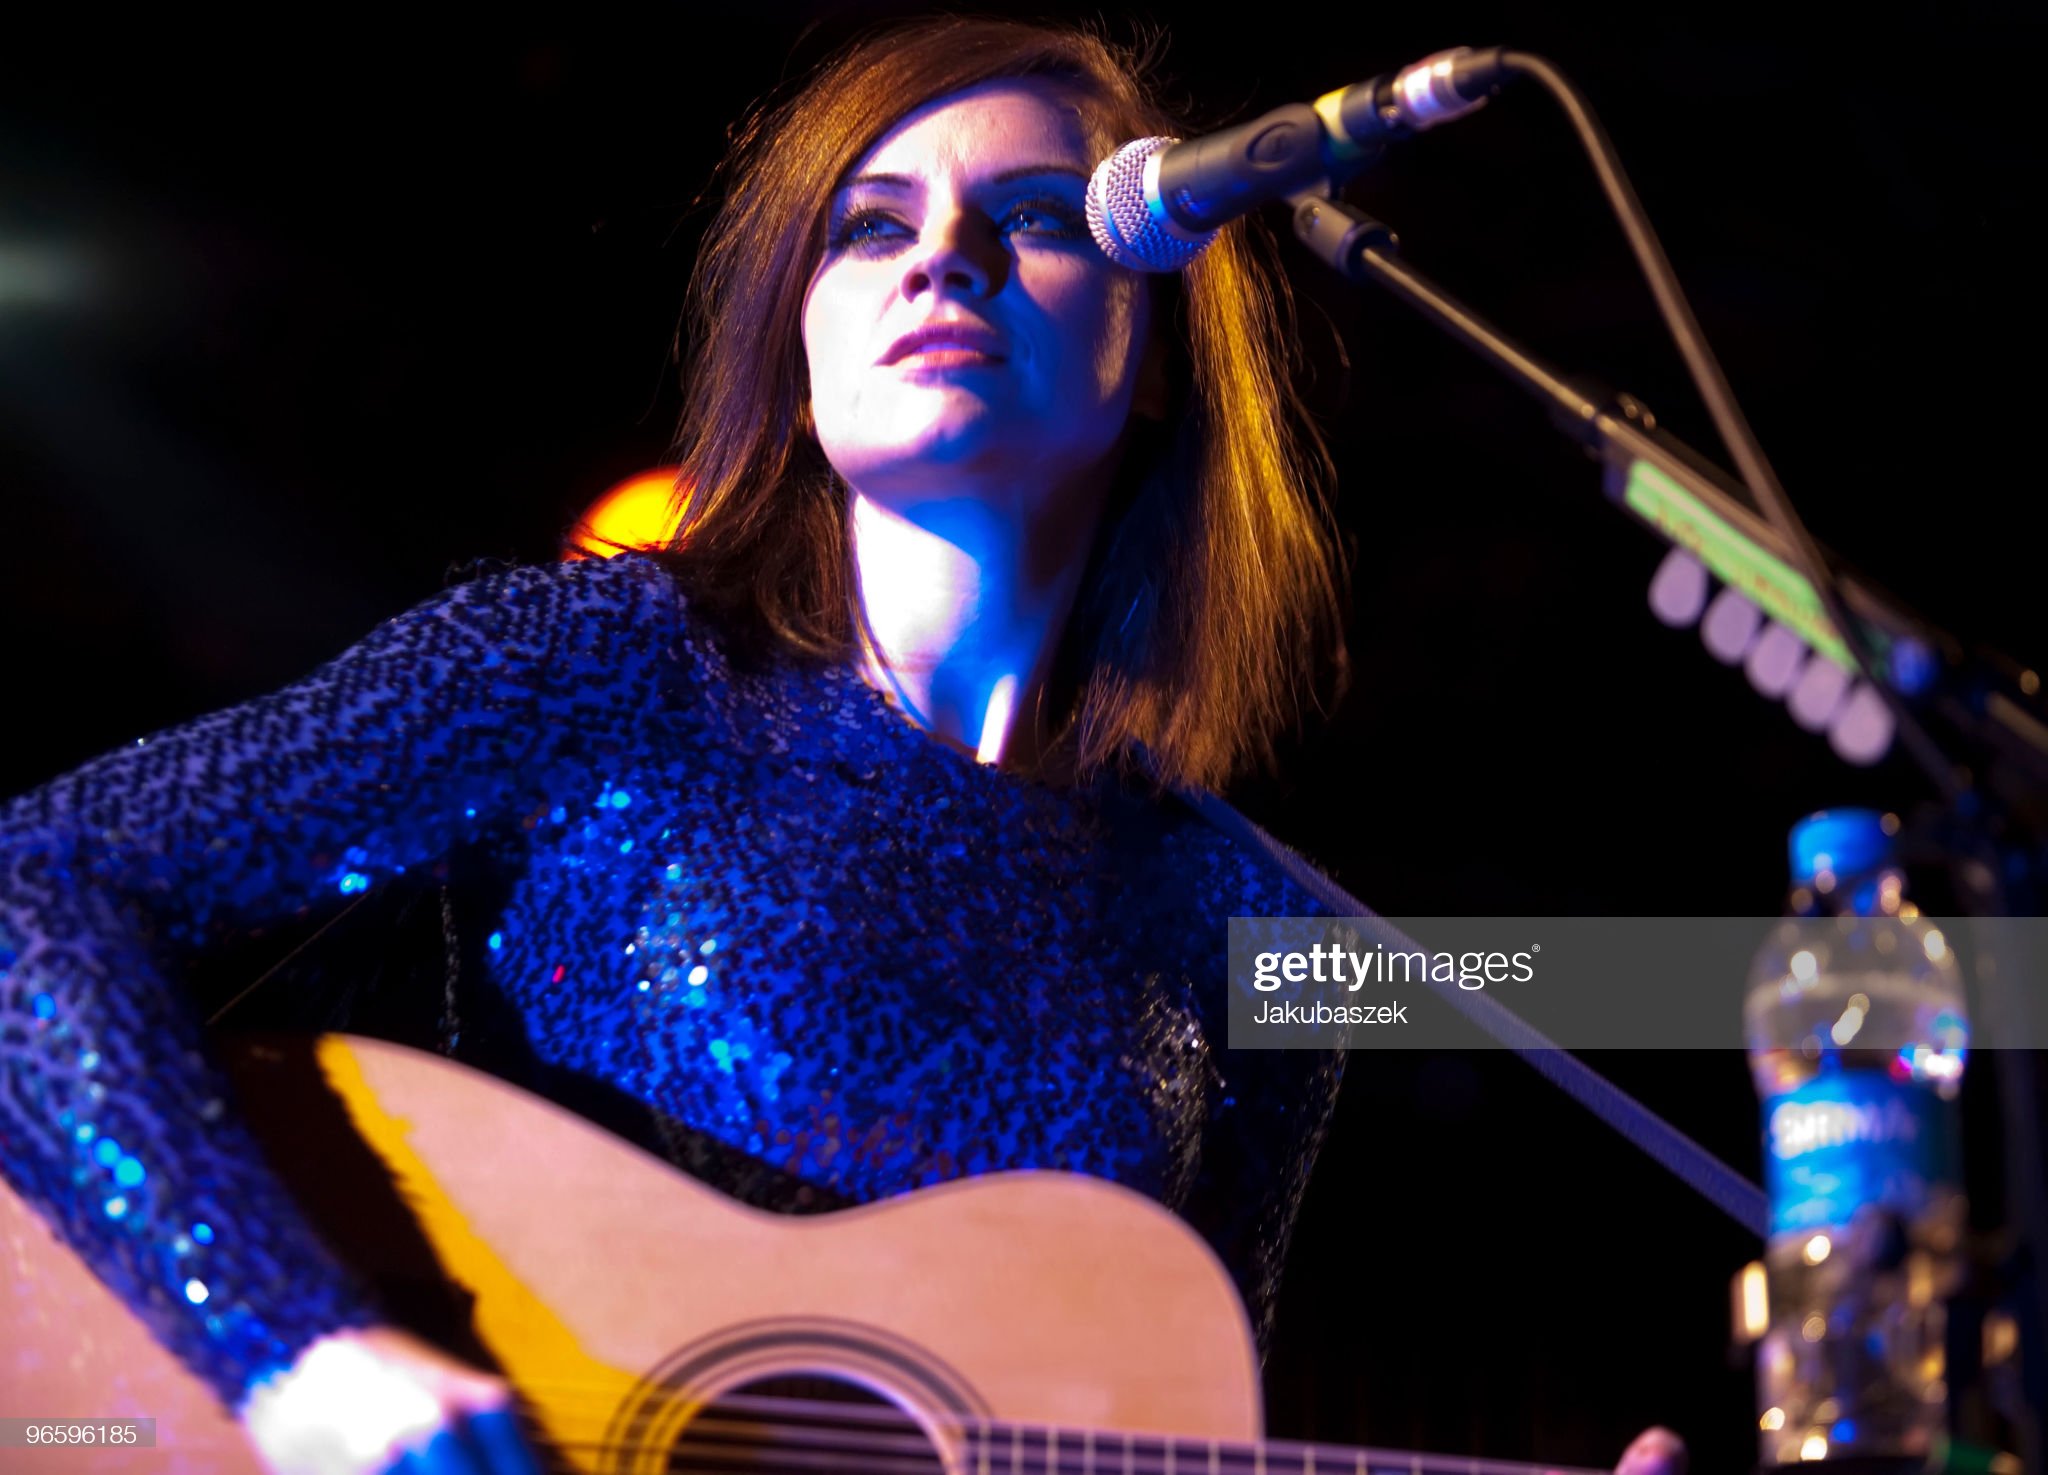 Scottish singer and songwriter Amy MacDonald performs live during a concert at the Astra Club on February 11, 2010 in Berlin, Germany.